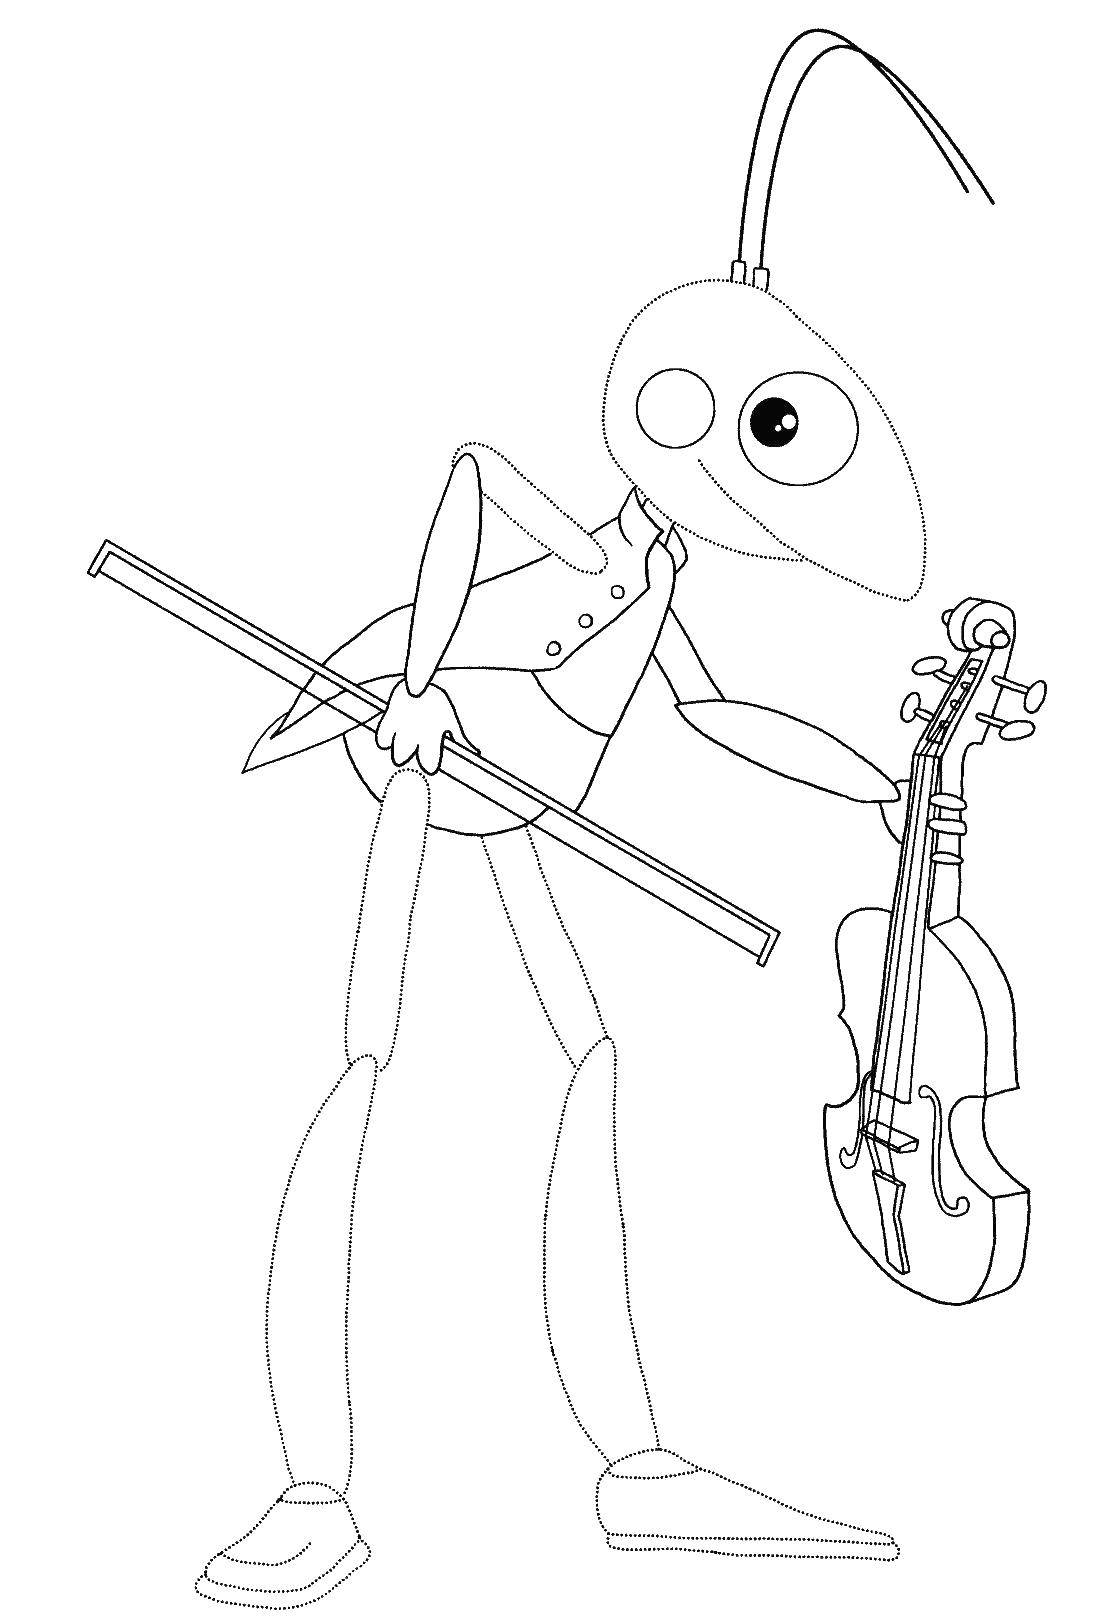 Coloring Grasshopper playing the violin. Category grasshopper . Tags:  the grasshopper Kuzma.